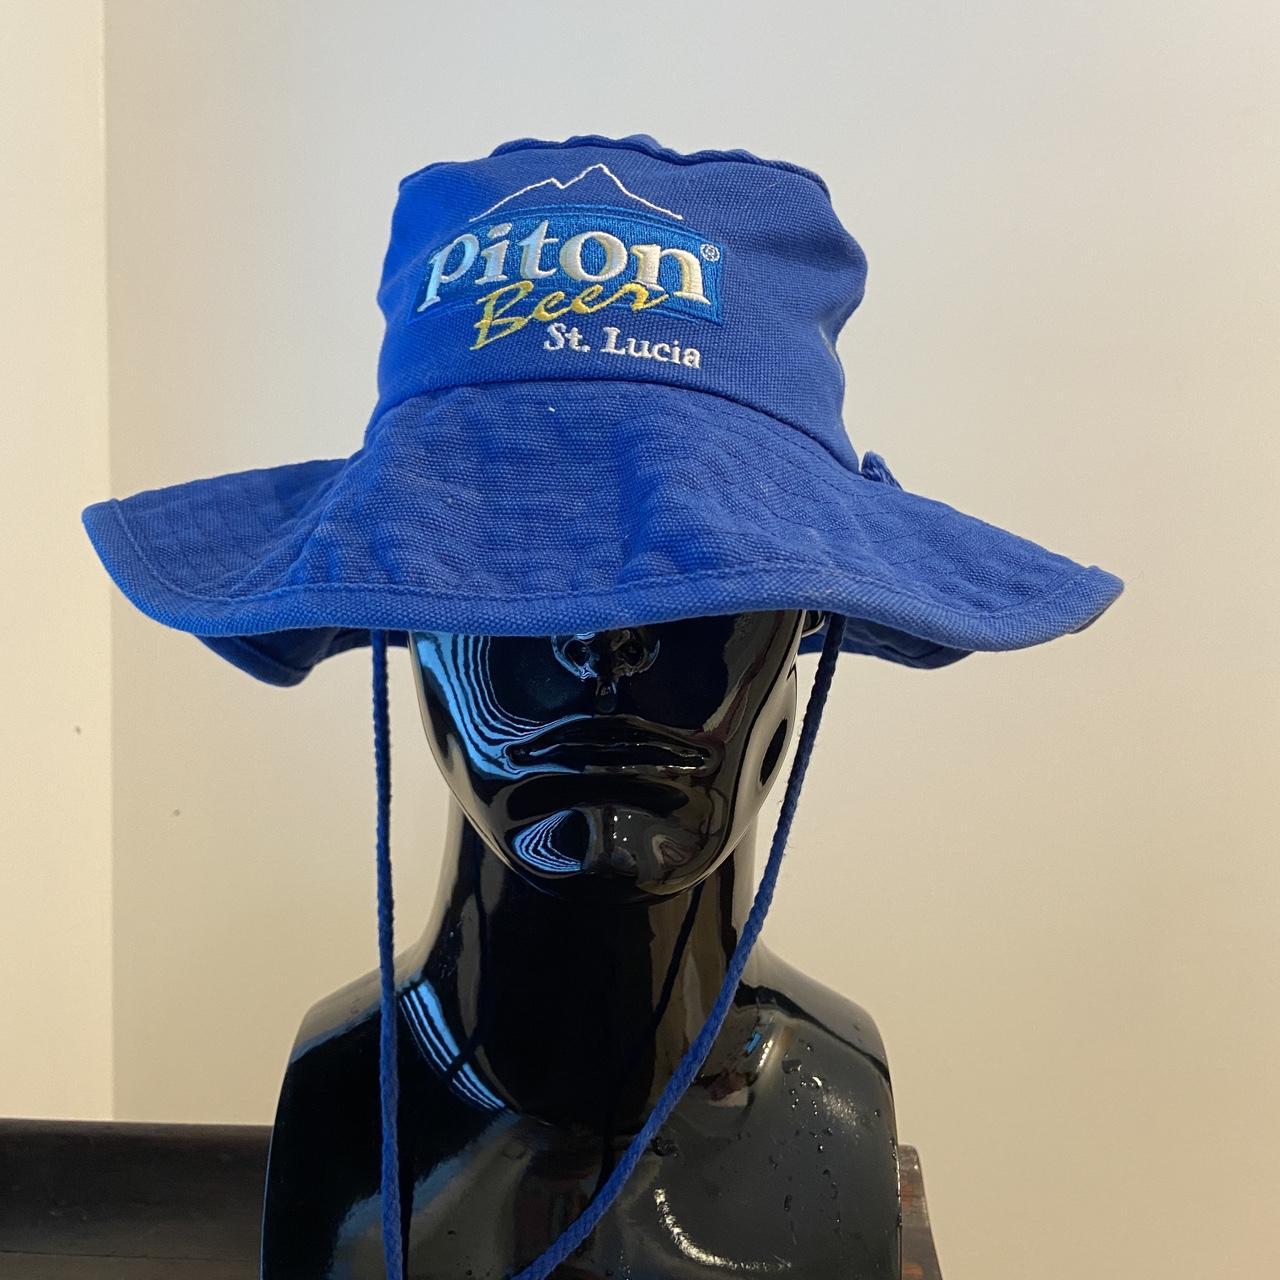 Vintage Piton Beer sun hat from St. Lucia (some - Depop